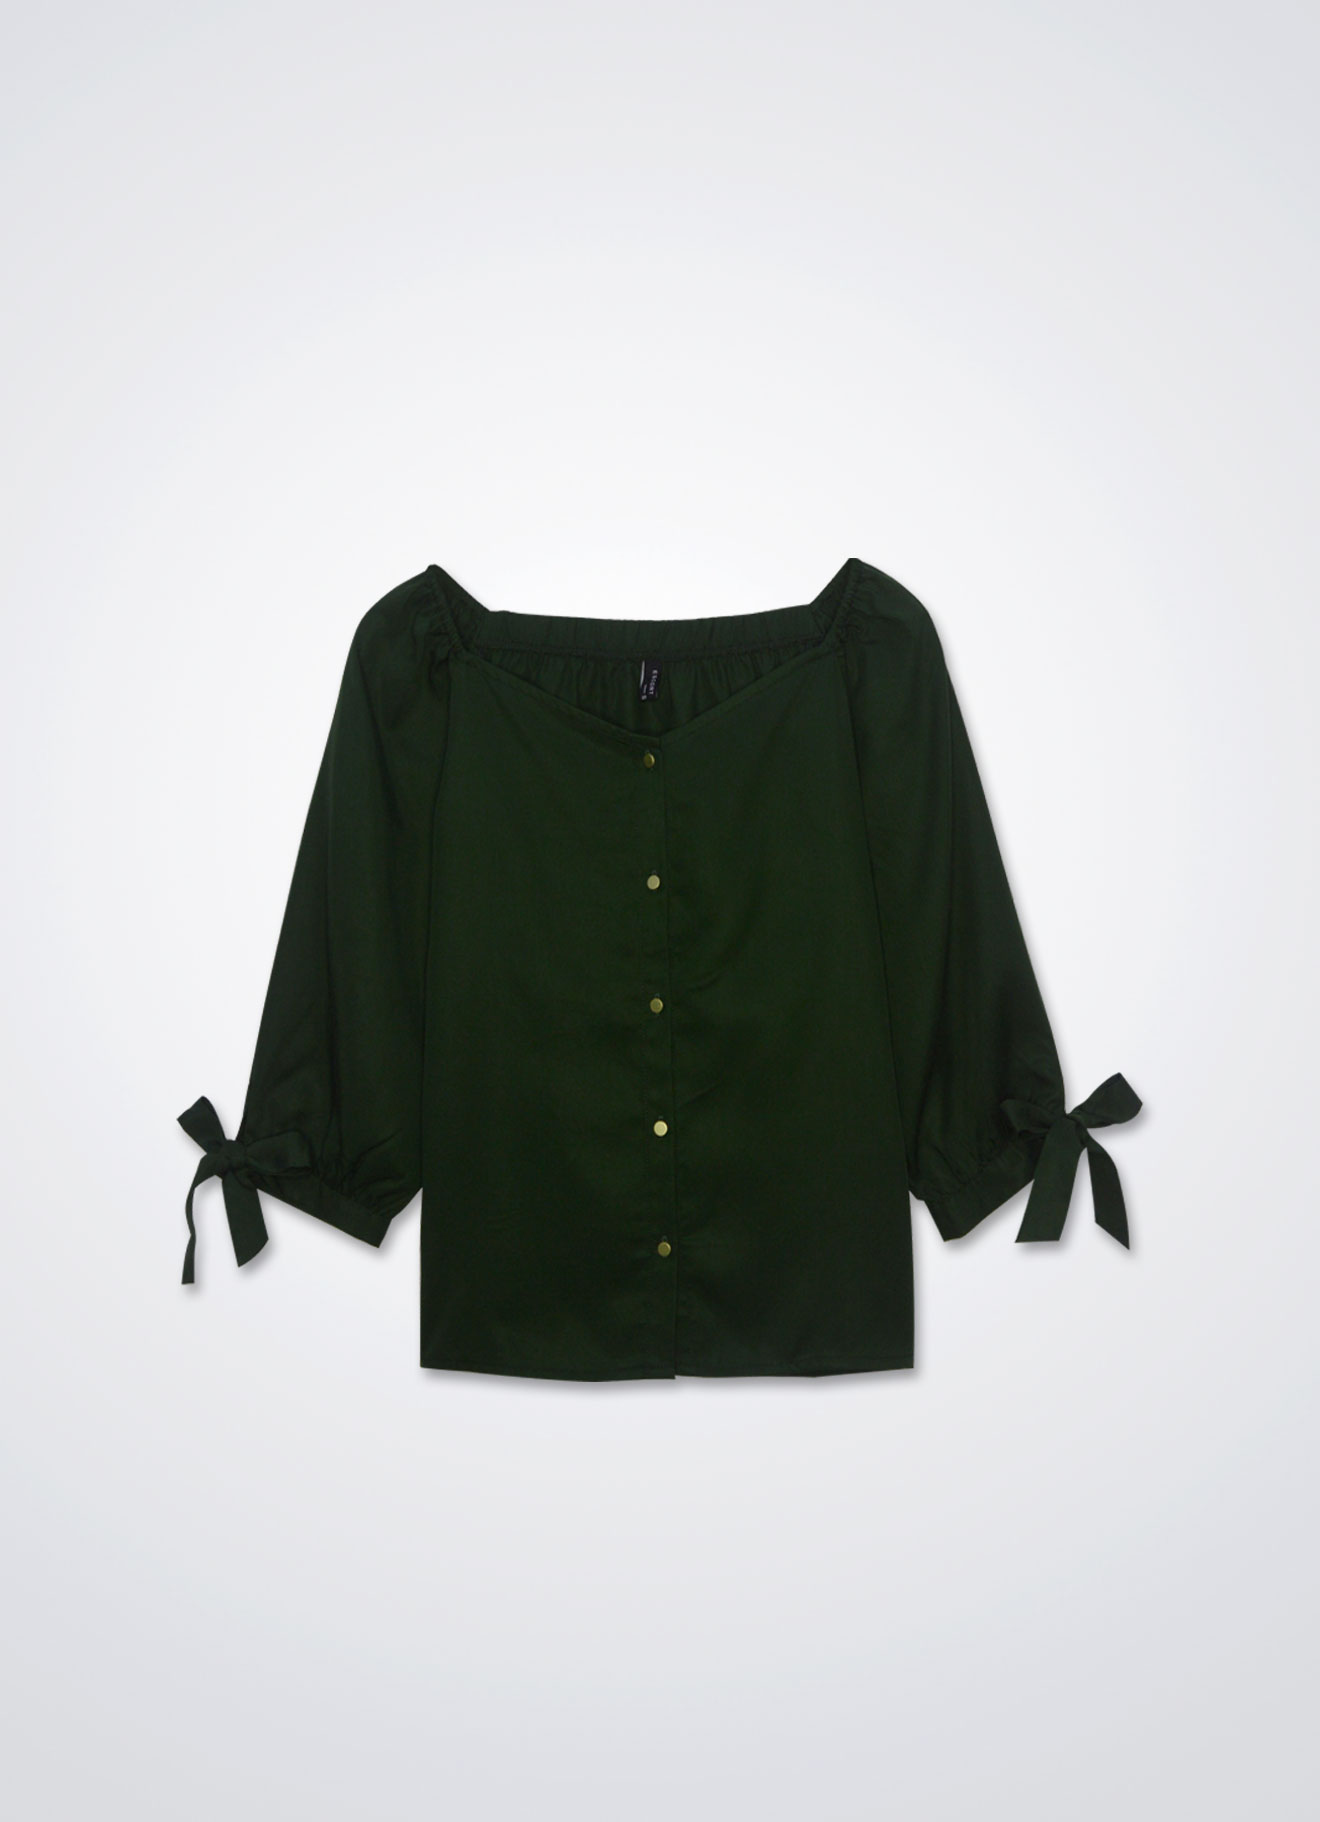 Black-Forest by Sleeve Top